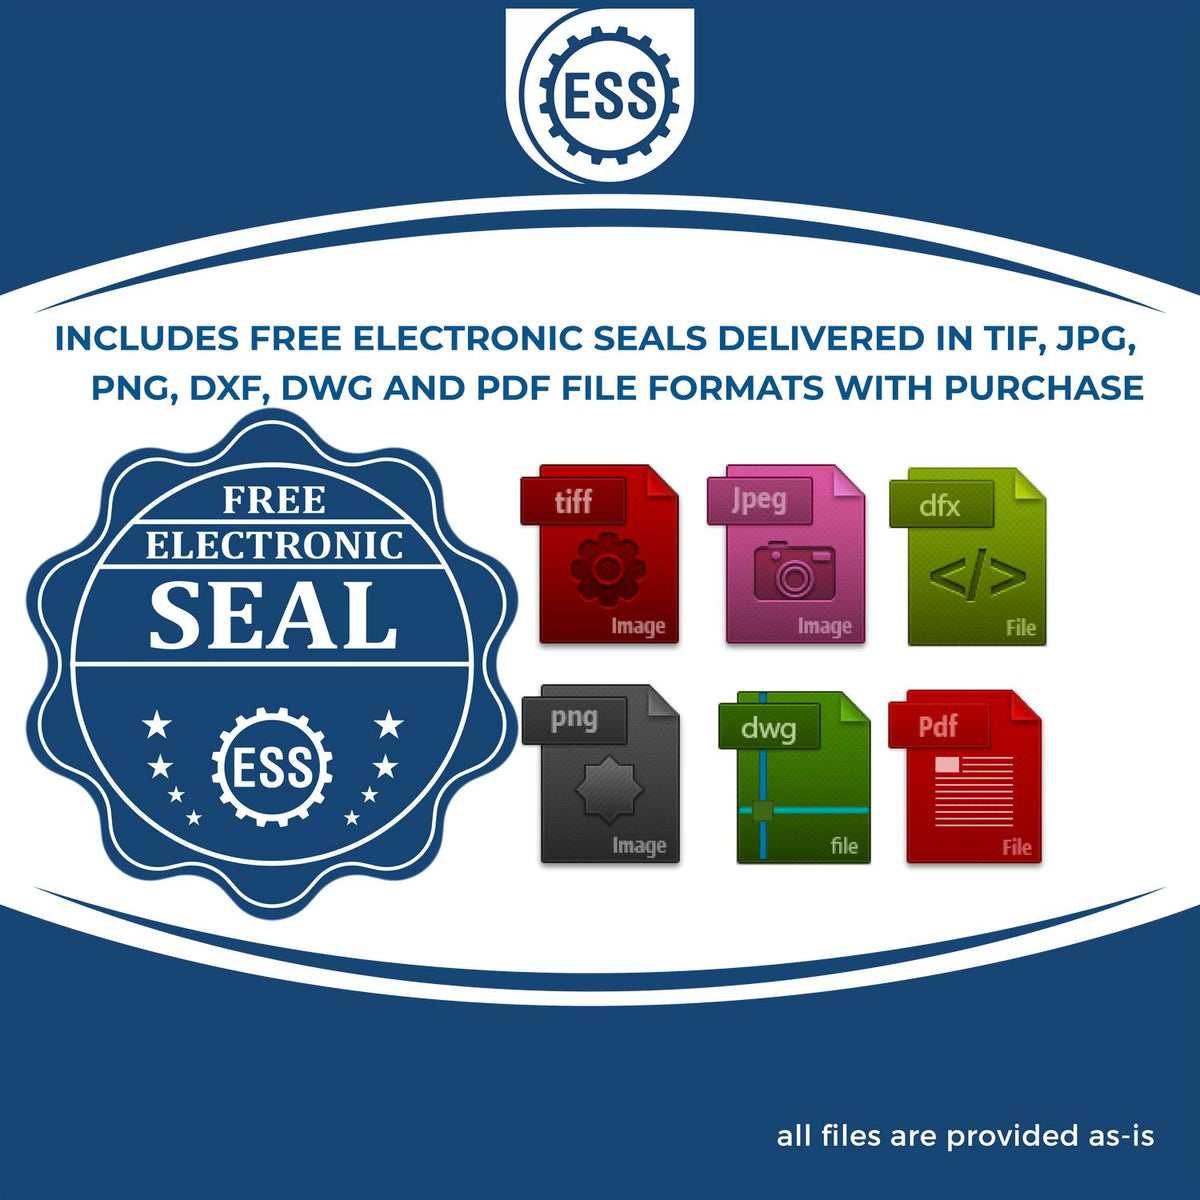 An infographic for the free electronic seal for the Slim Pre-Inked Arkansas Landscape Architect Seal Stamp illustrating the different file type icons such as DXF, DWG, TIF, JPG and PNG.